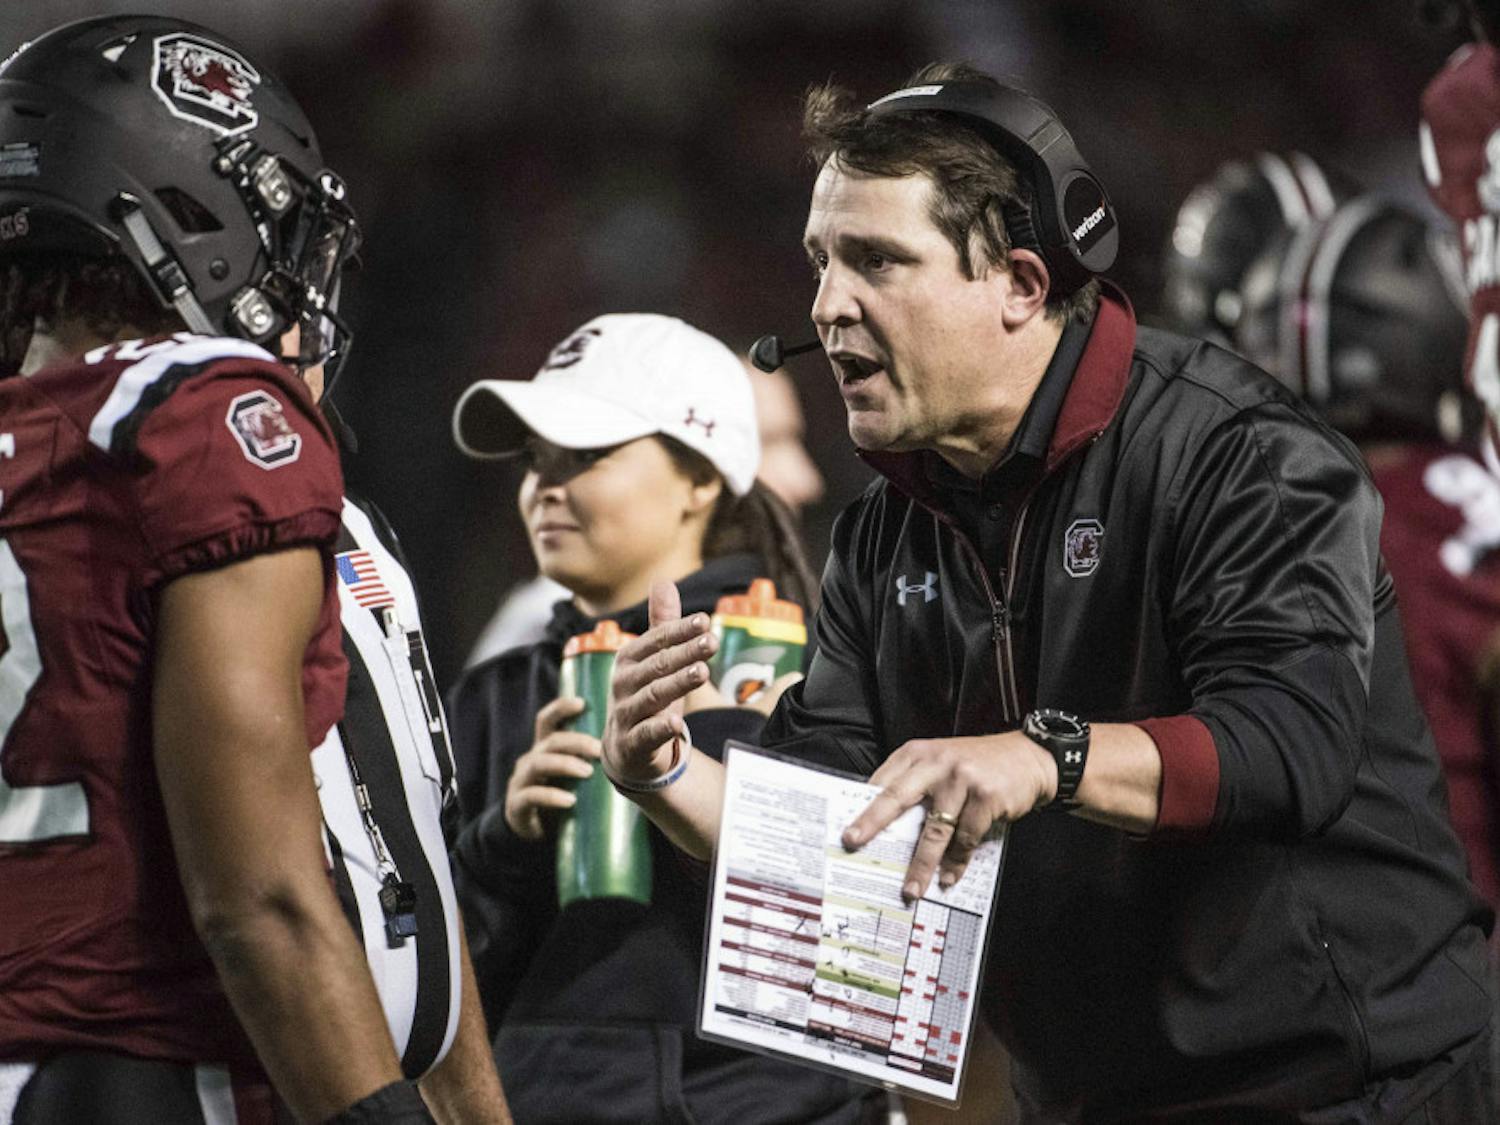 South Carolina head coach Will Muschamp, right, communicates with defensive back Steven Montac (22) during the second half of an NCAA college football game Saturday, Nov. 5, 2016, in Columbia, S.C. South Carolina defeated Missouri 31-21. (AP Photo/Sean Rayford)